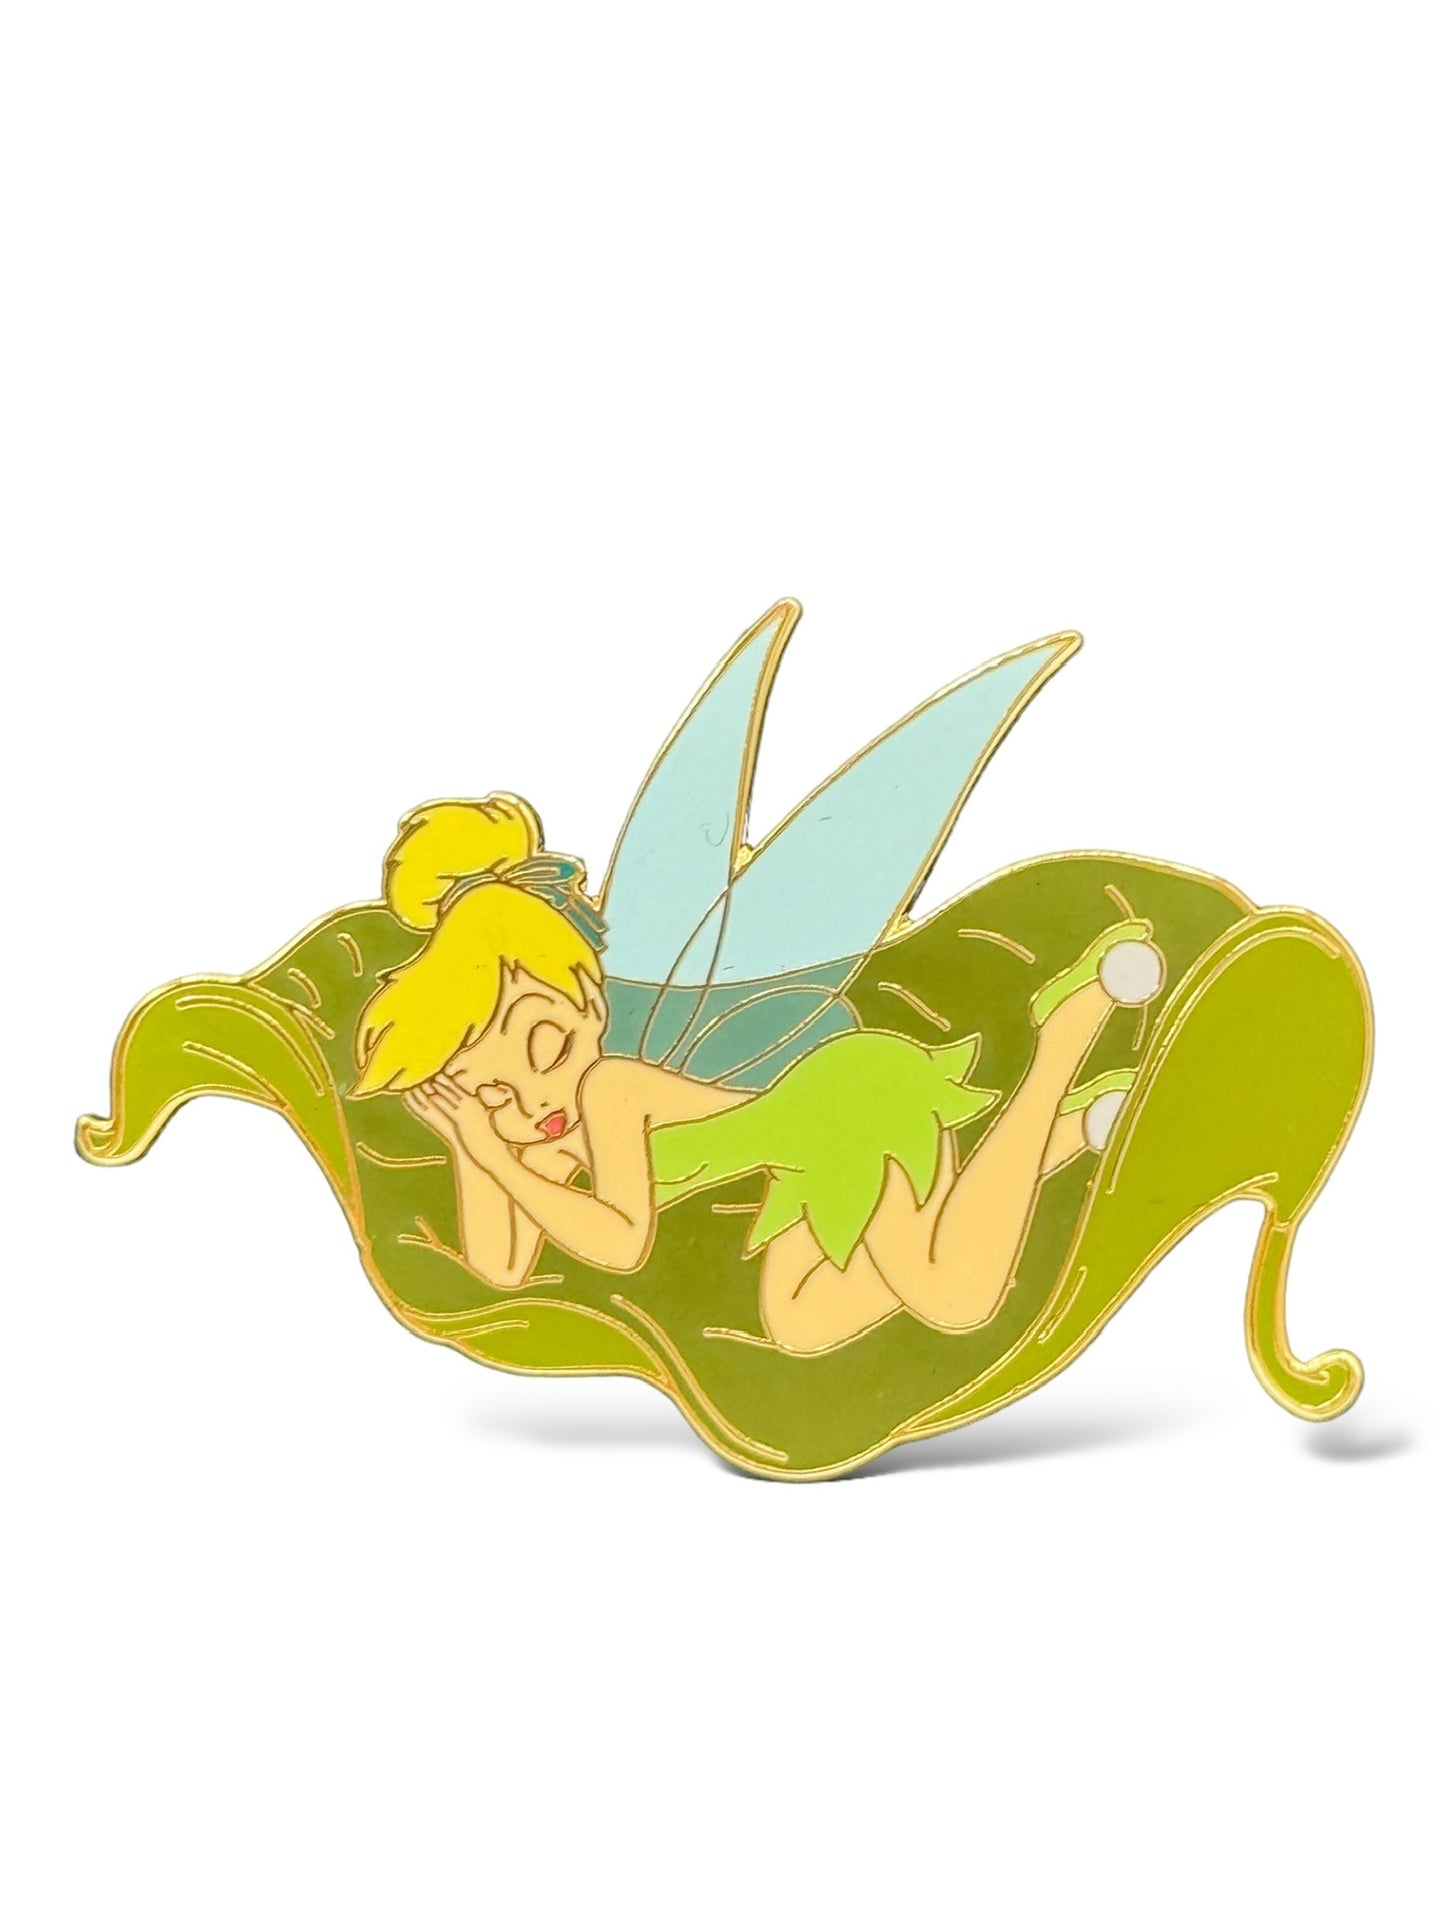 Disney Auctions Tinker Bell Sleeping on Leaf Pin